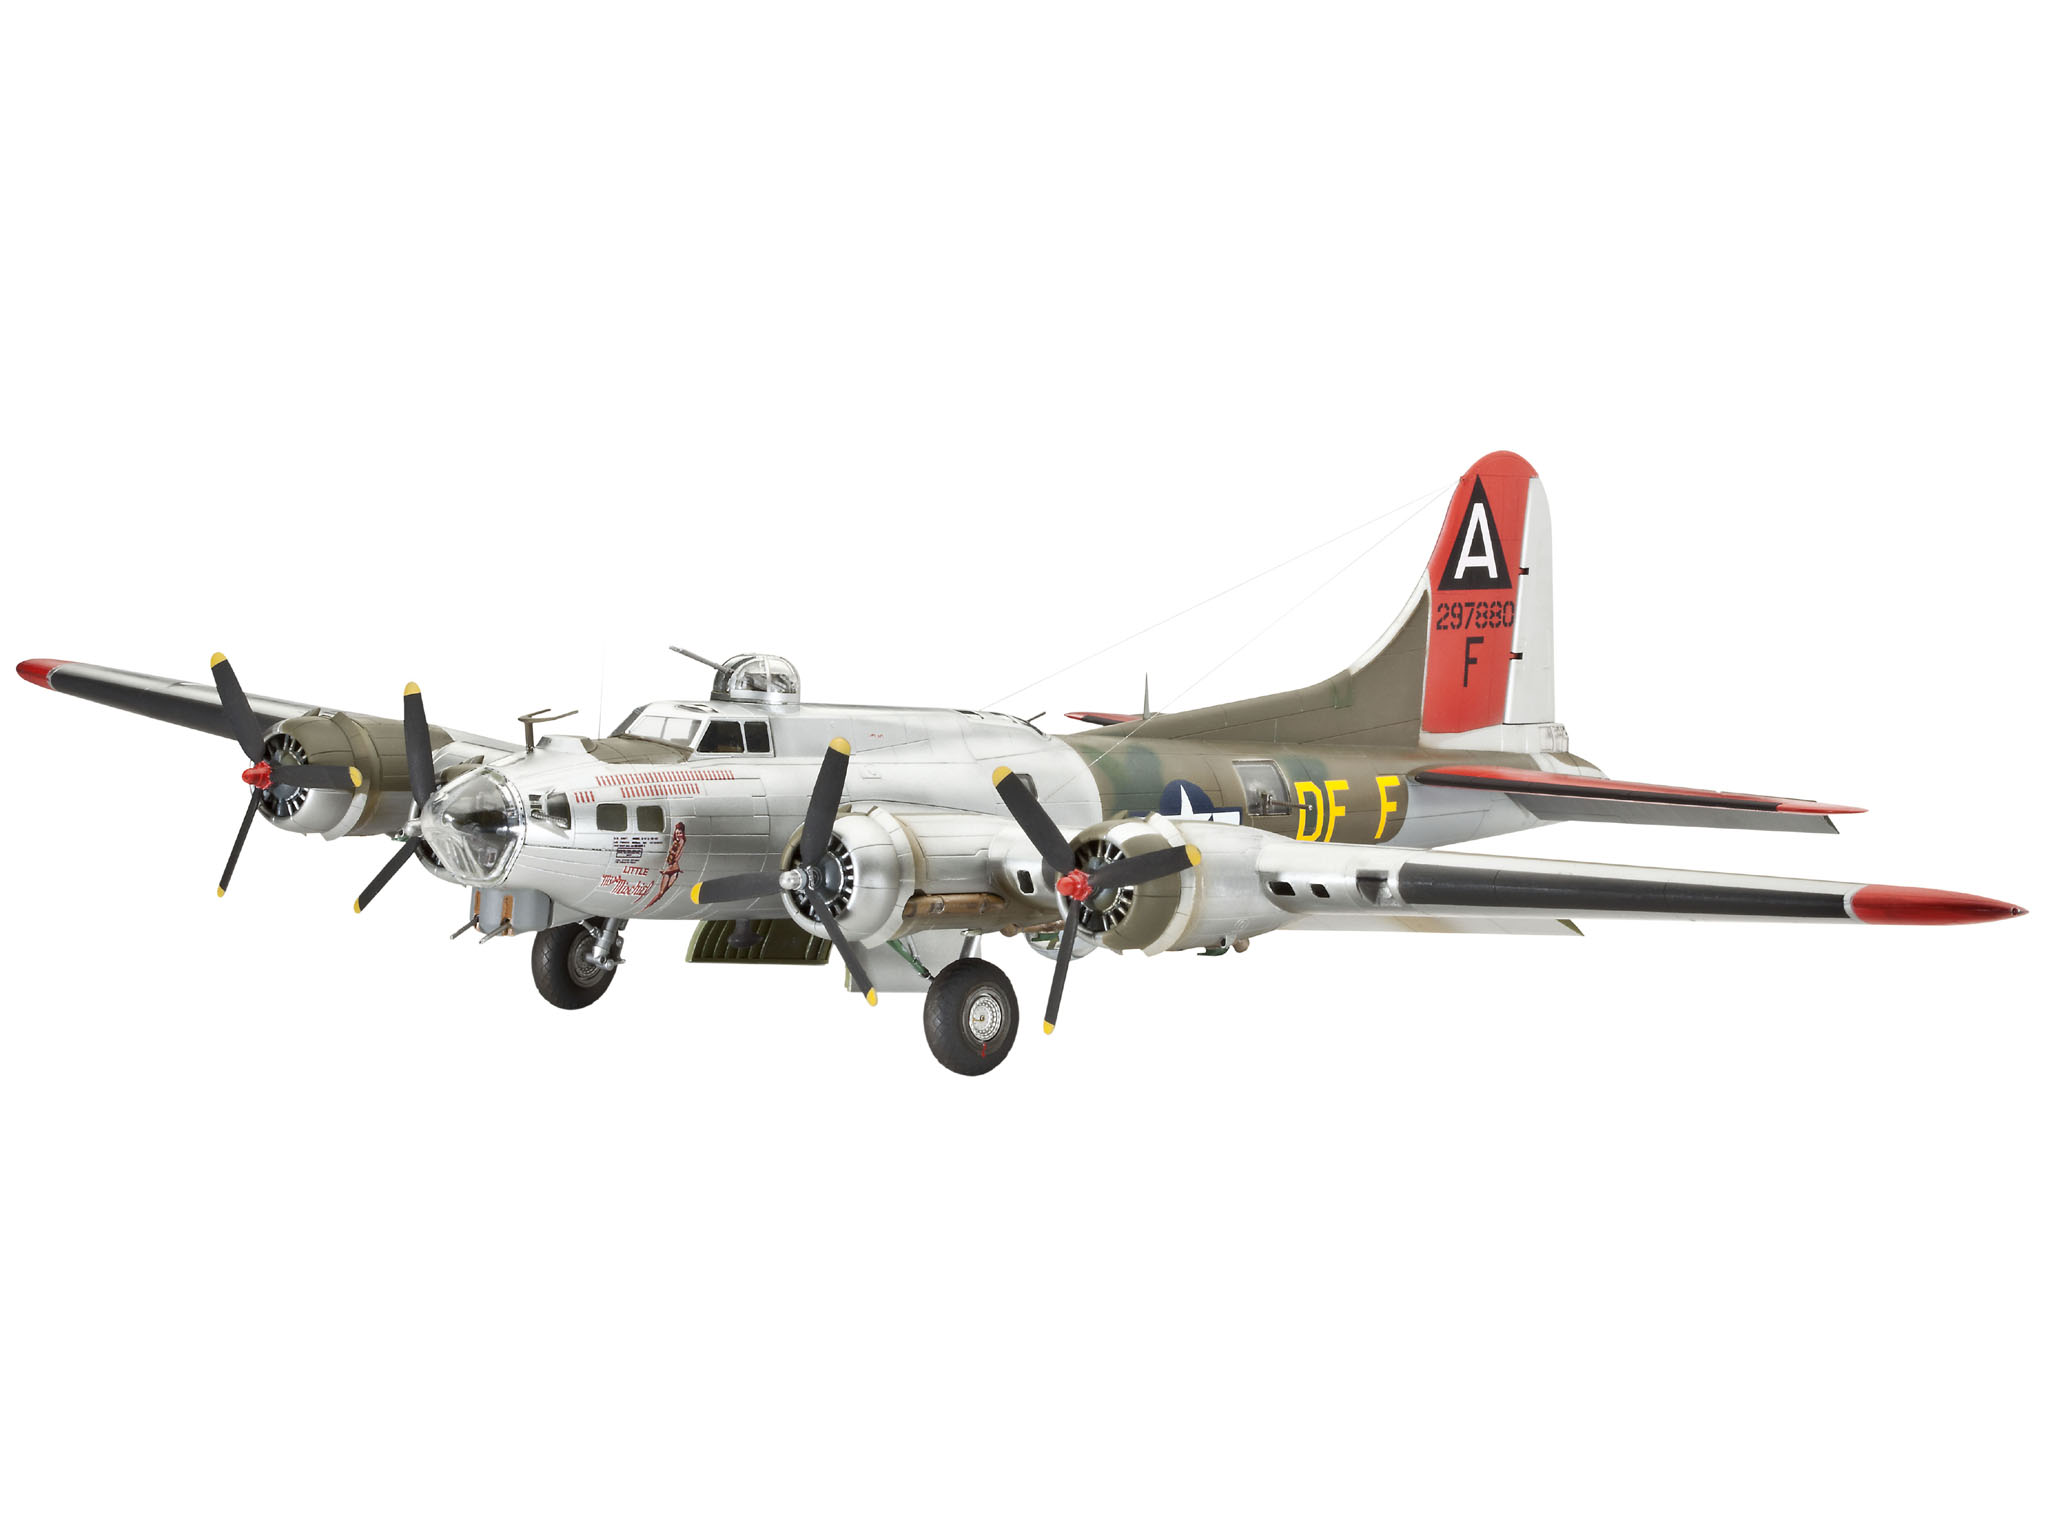 B-17G Flying Fortress - B-17G Flying Fortress